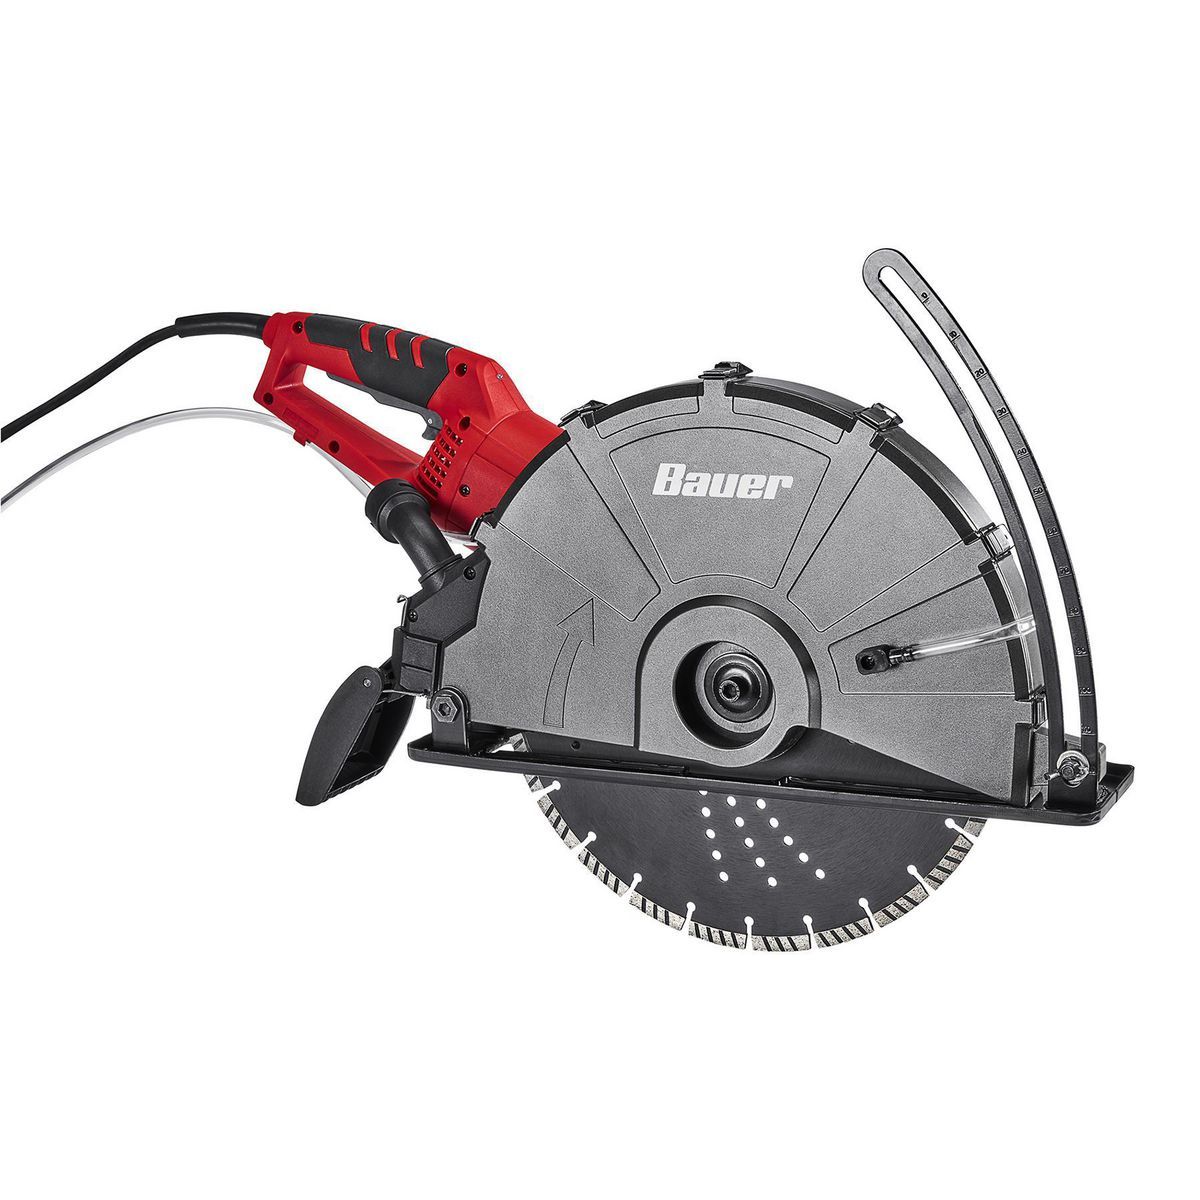 BAUER 15 Amp 14 in. Portable Concrete Pull Saw